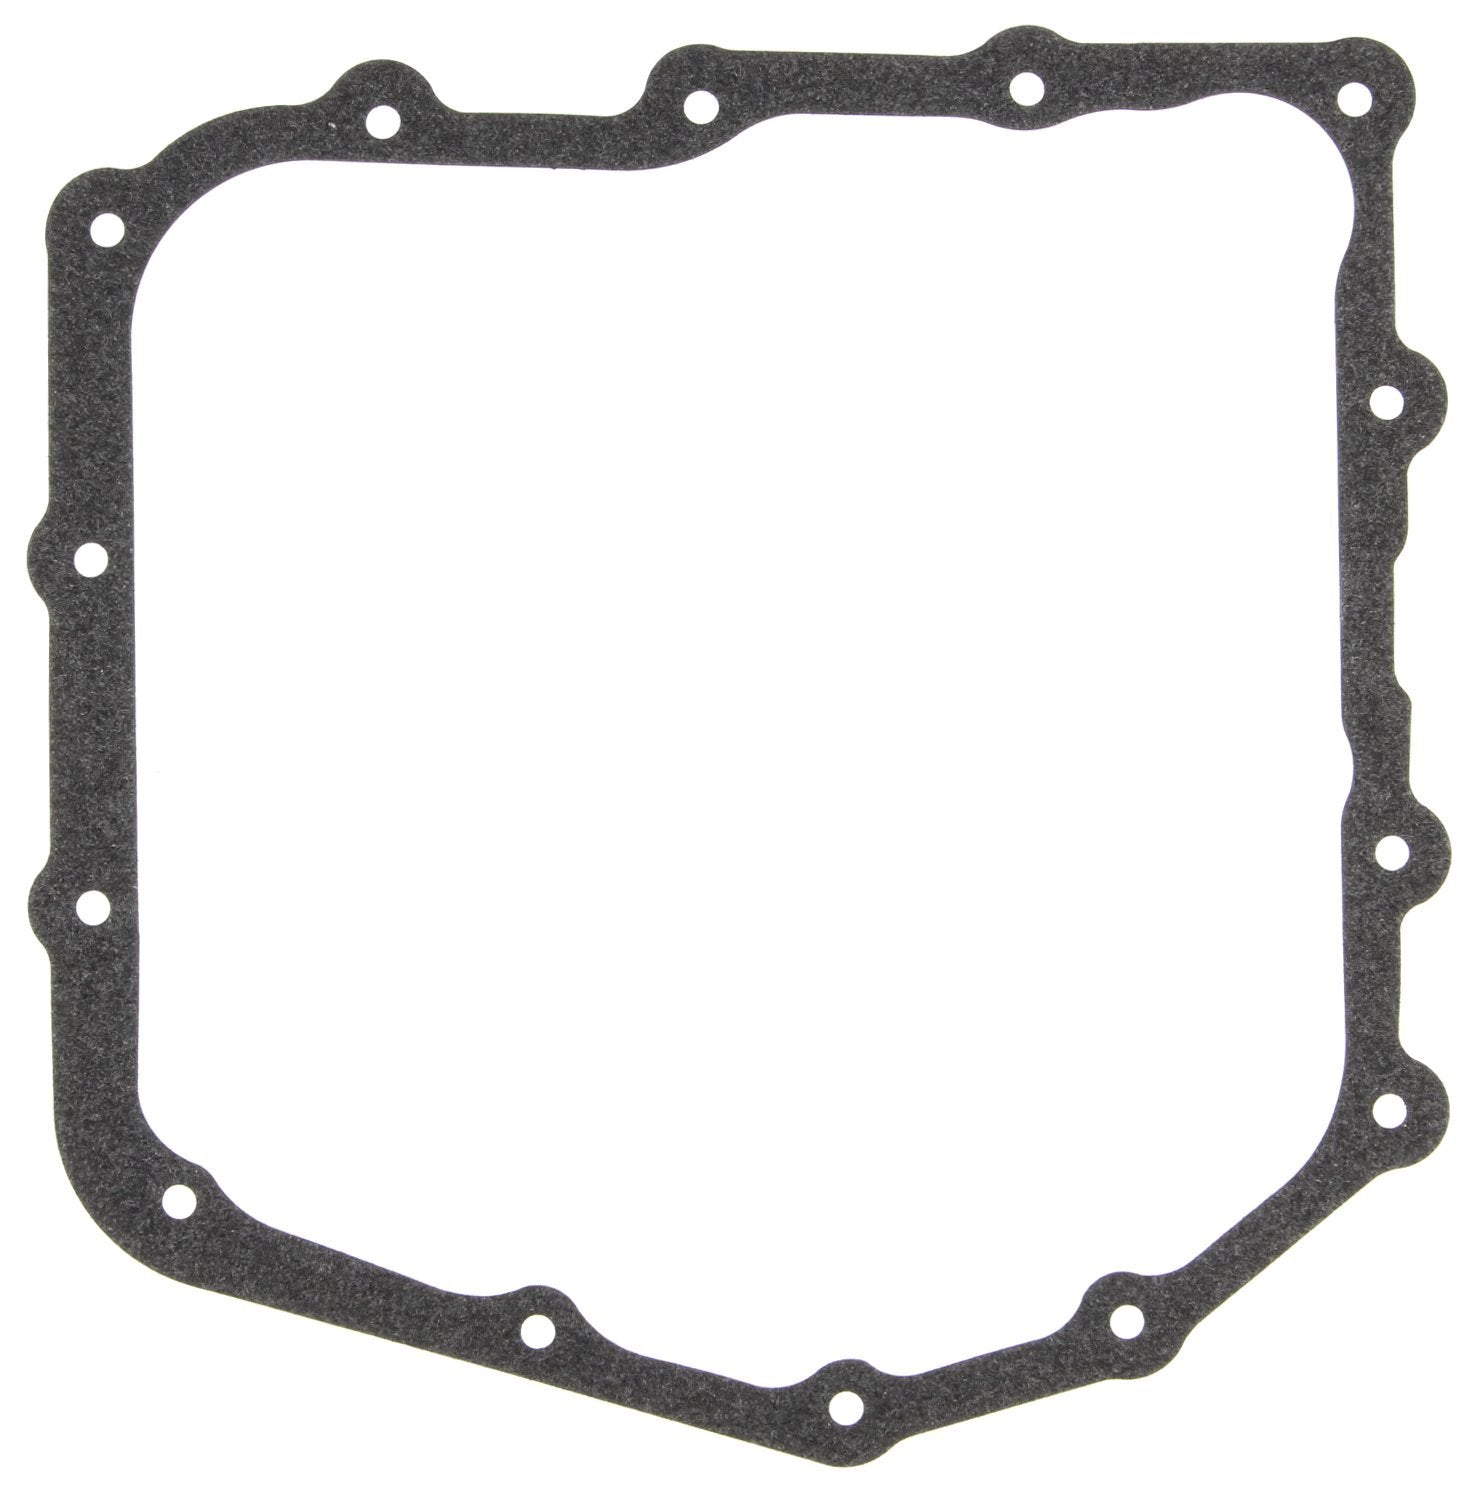 MAHLE Automatic Transmission Oil Pan Gasket W32770